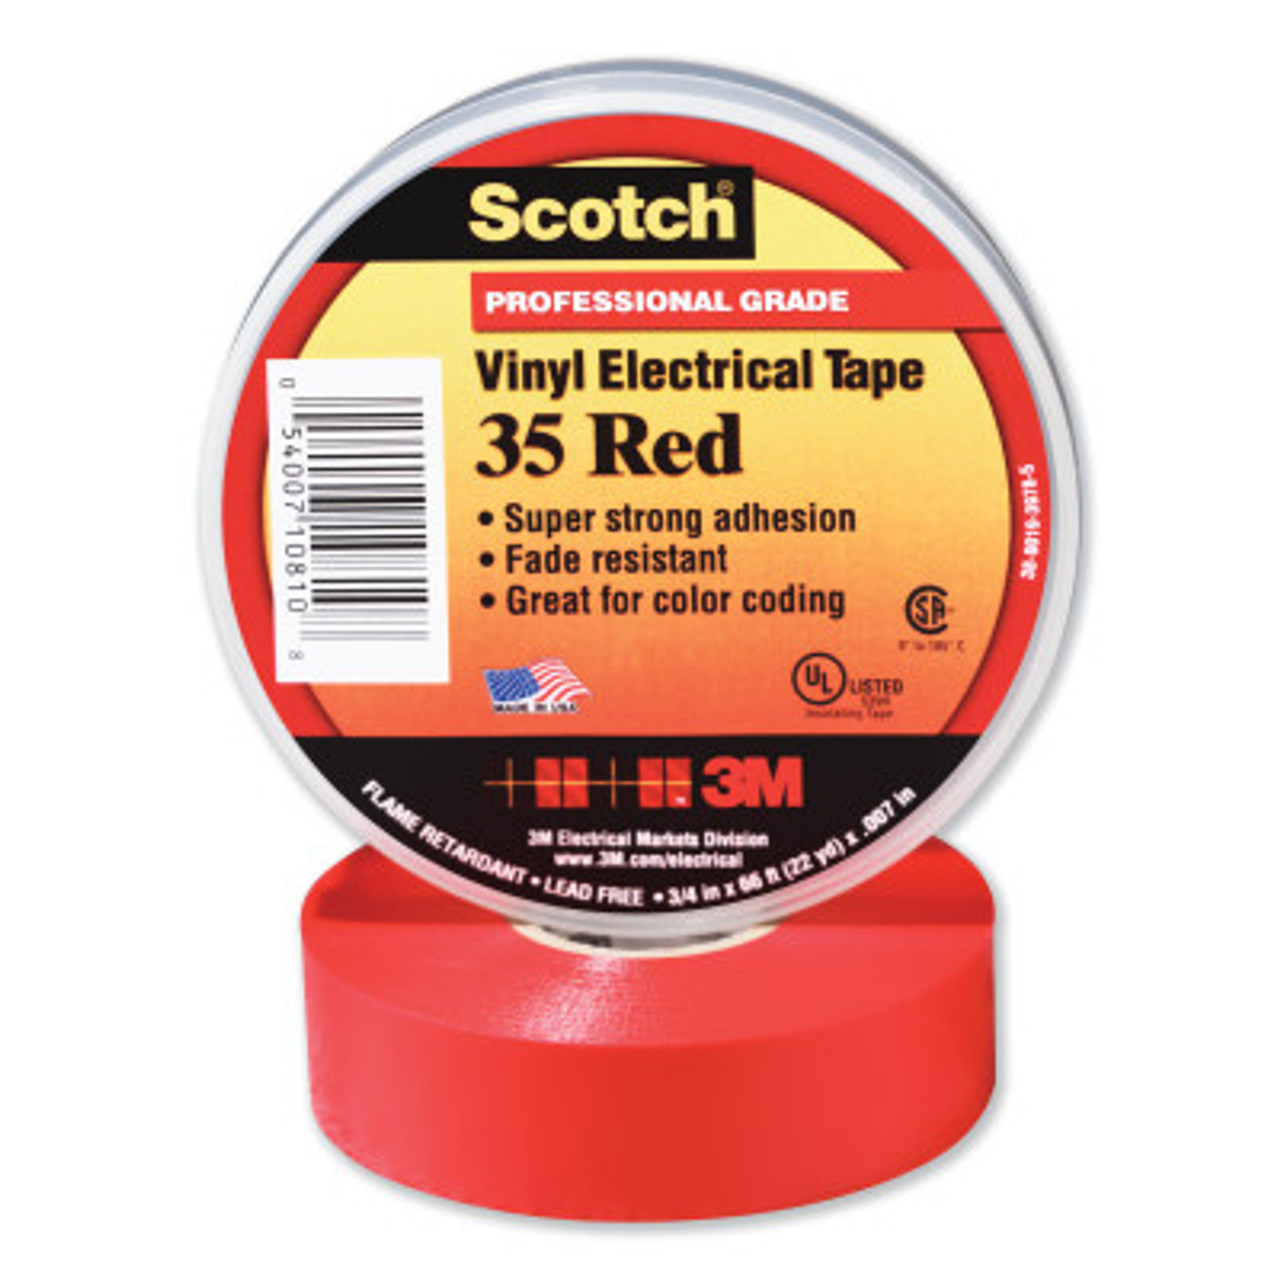 Scotch Vinyl Electrical Color Coding Tapes 35, White